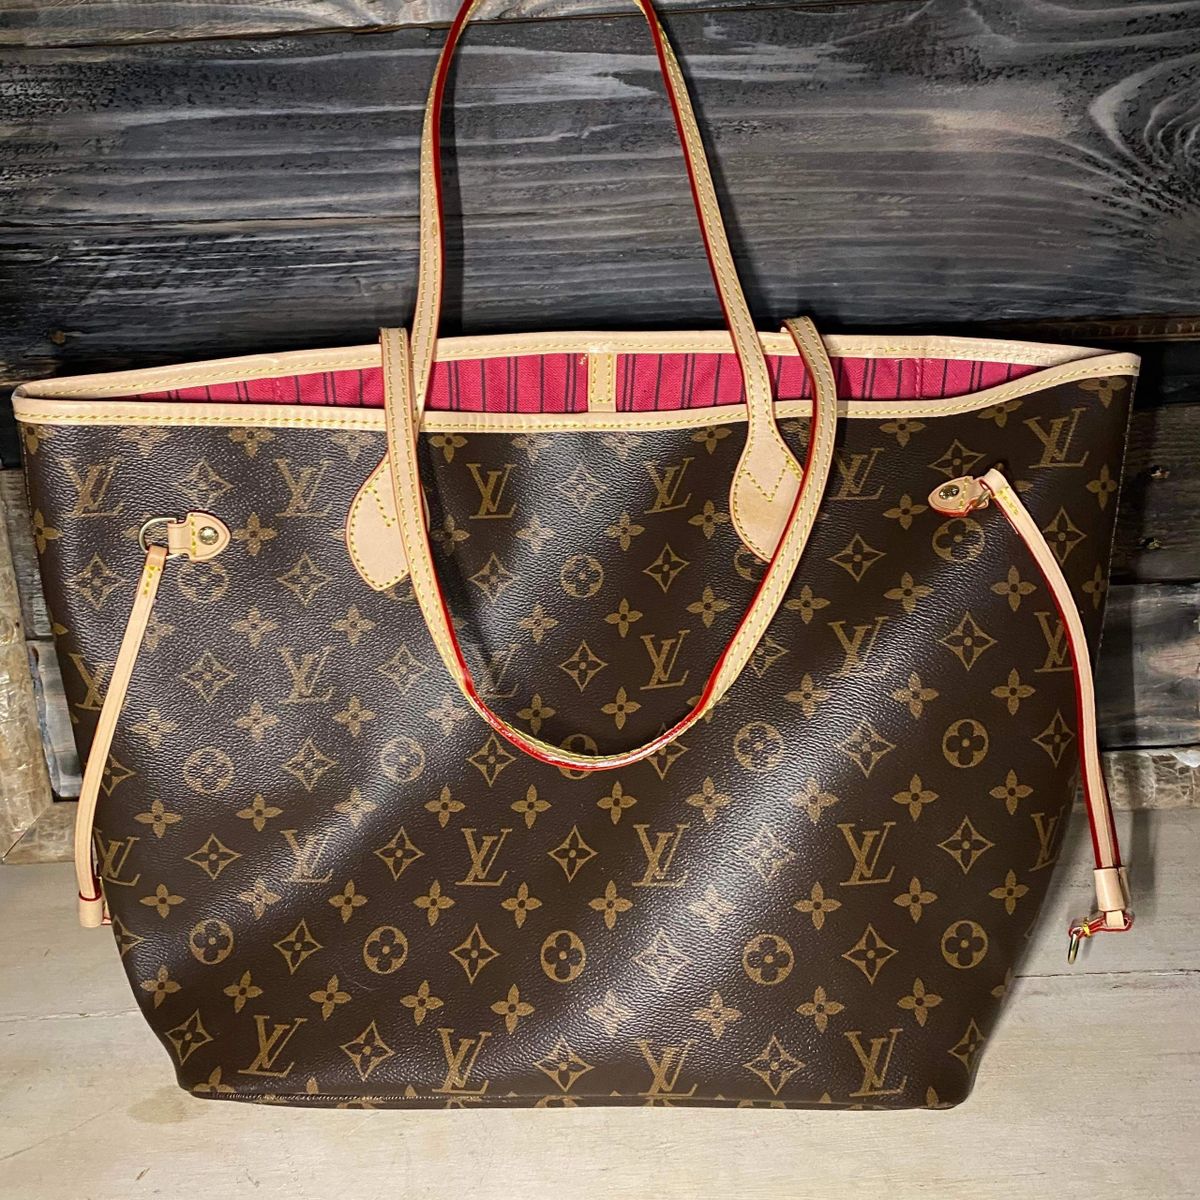 louis vuitton neverfull red interior